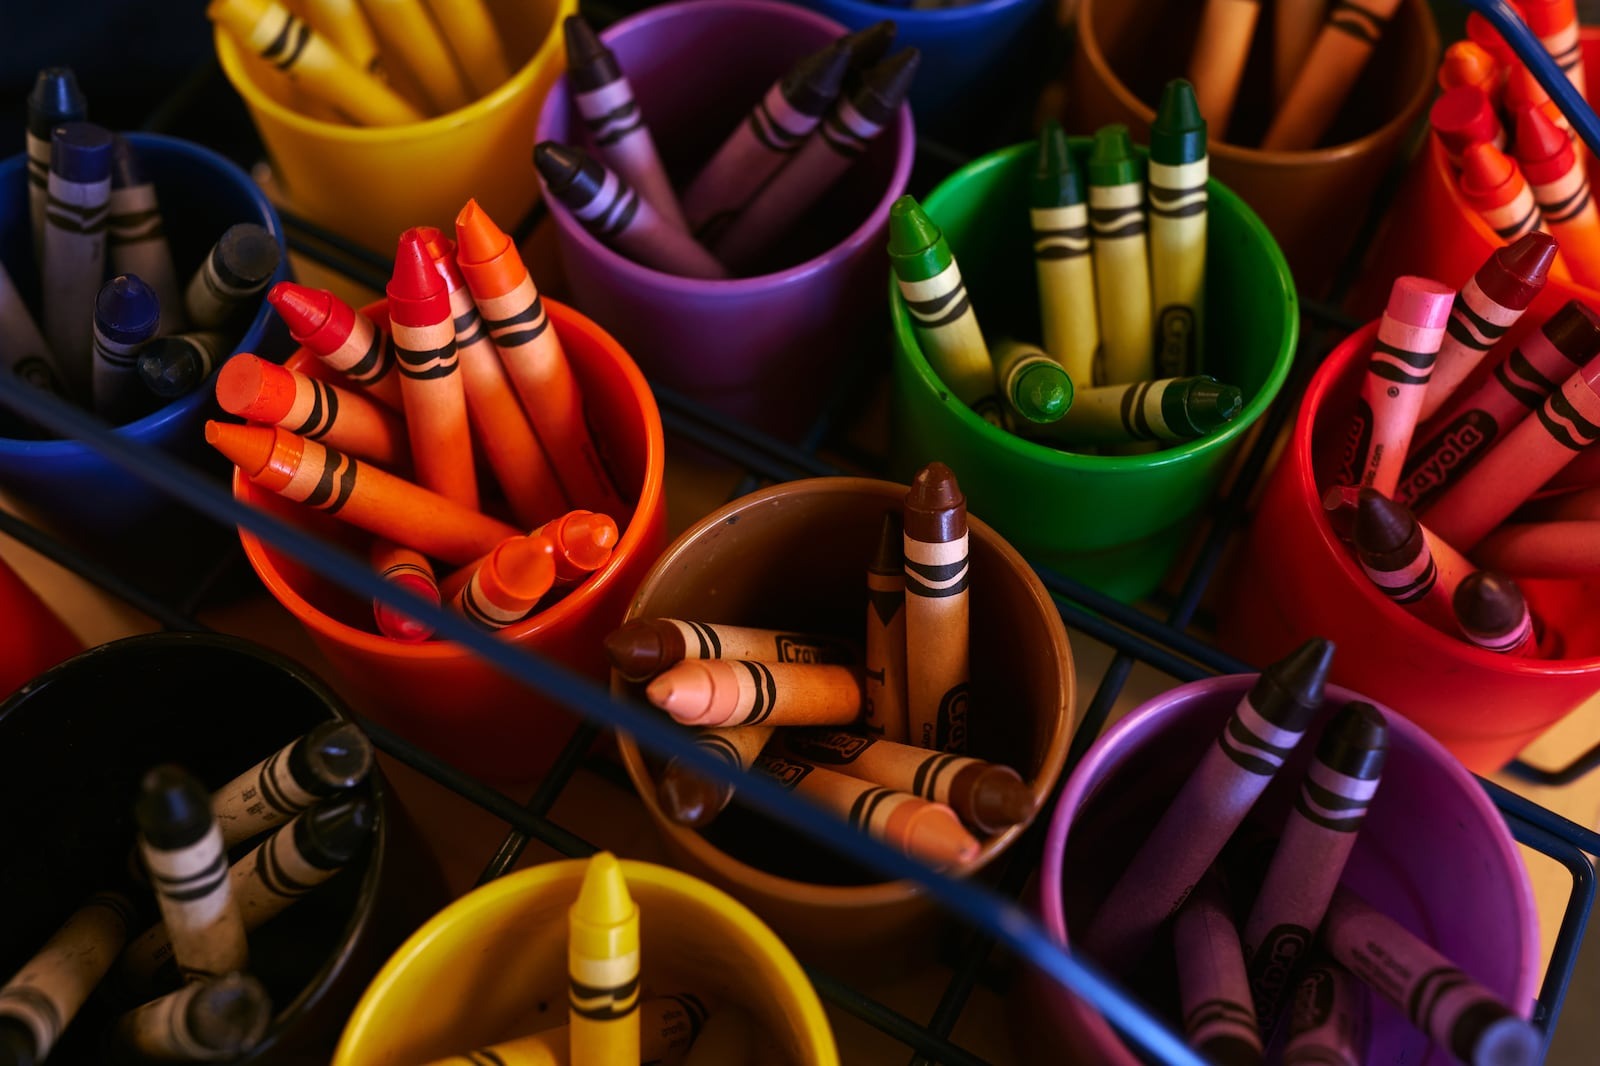 Cups filled with crayons.